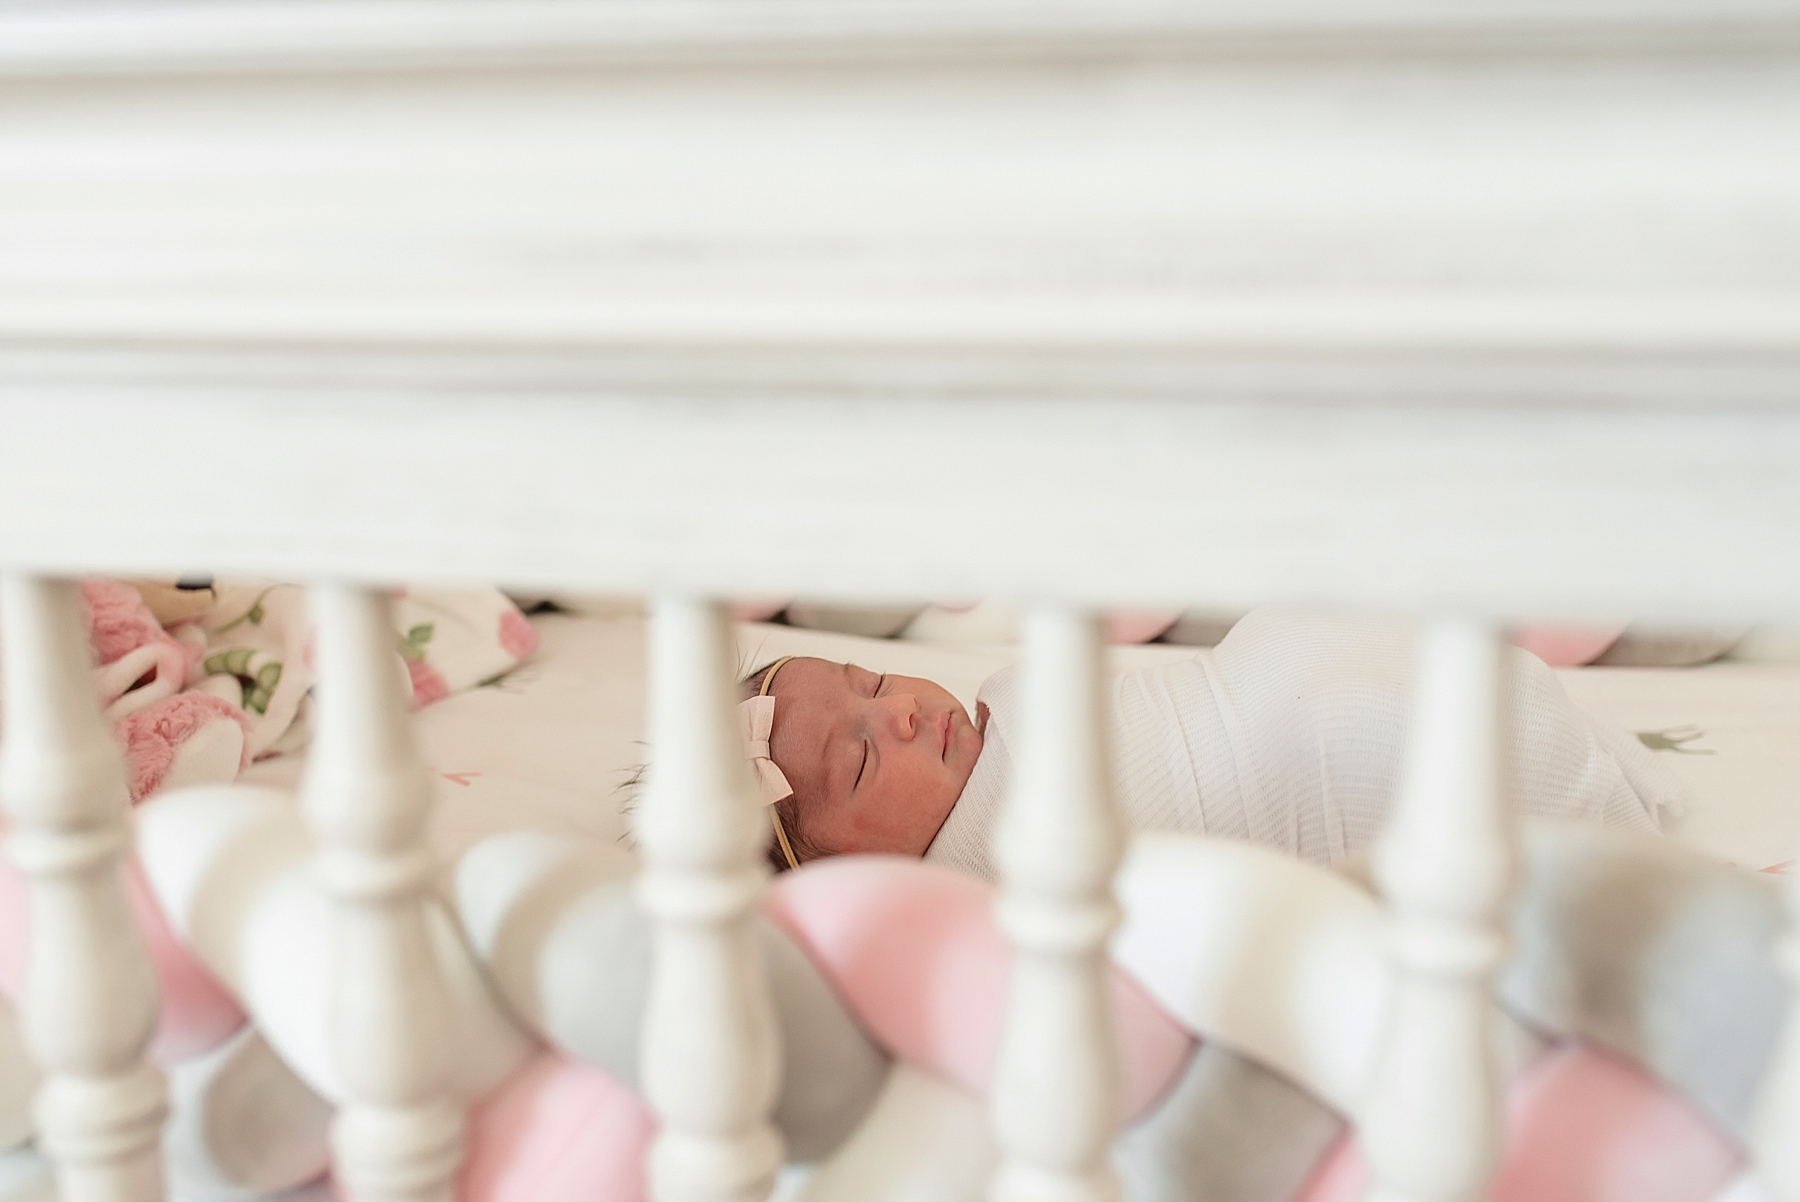 Pink and white nursery for newborn baby girl | In-Home Newborn Photo Session | Lindsey Dutton Photography | Dallas Area Family Photographer | newborn session, newborn posing ideas, newborn photos, girl nursery inspiration | via lindseyduttonphotography.com